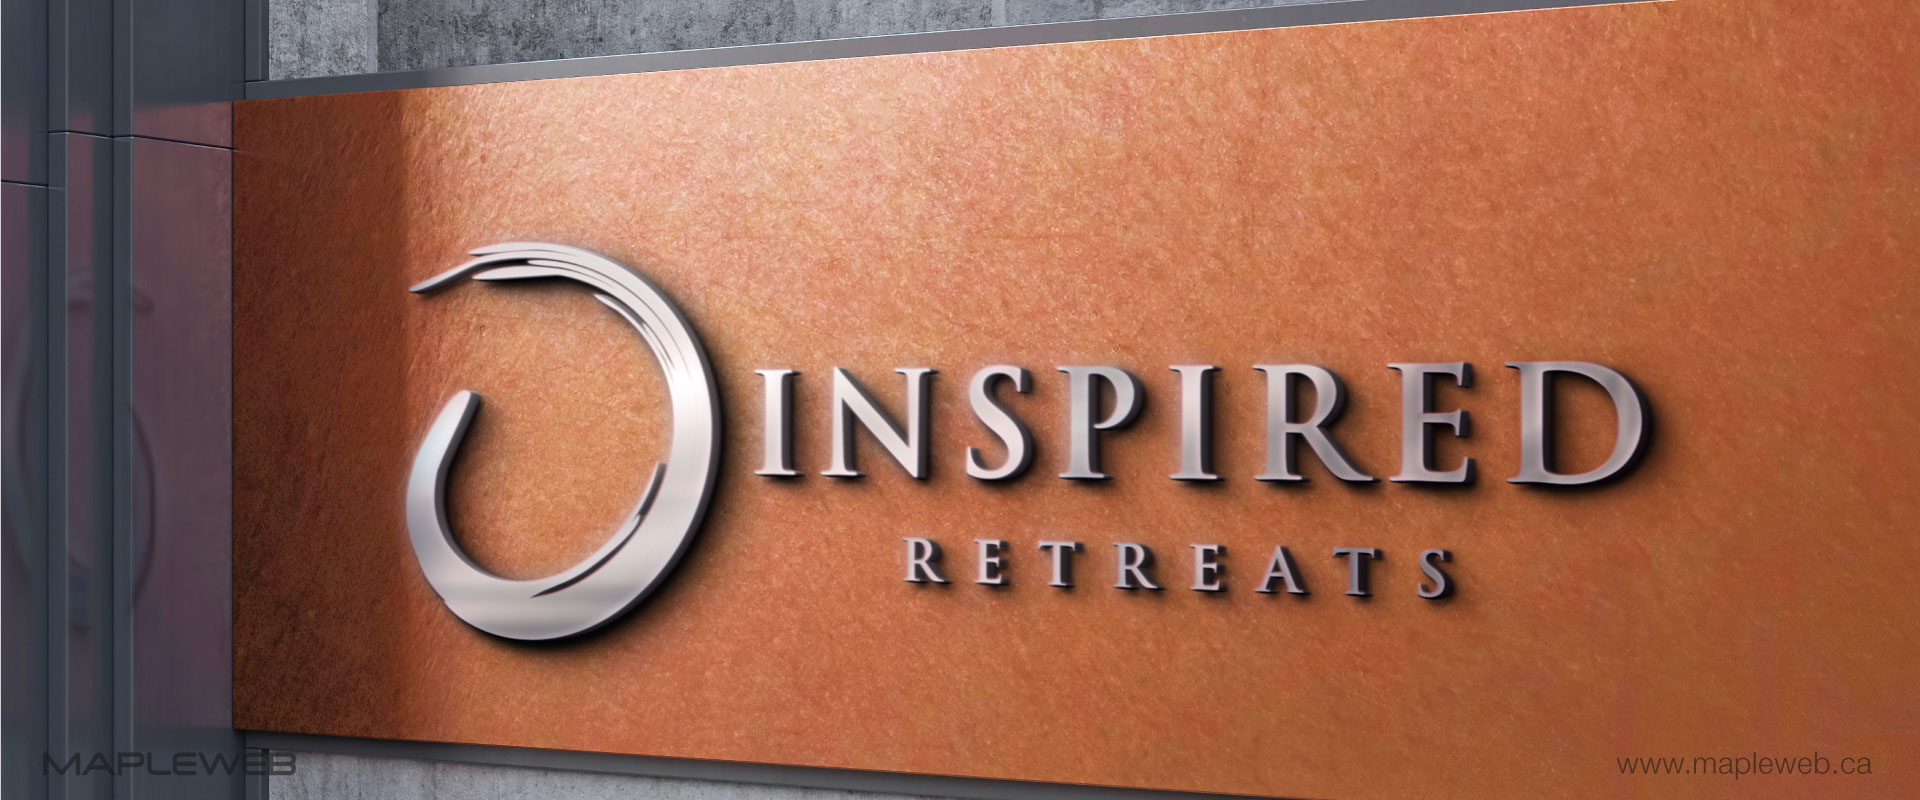 inspired-retreats-brand-logo-design-by-mapleweb-vancouver-canada-wall-texture-mock